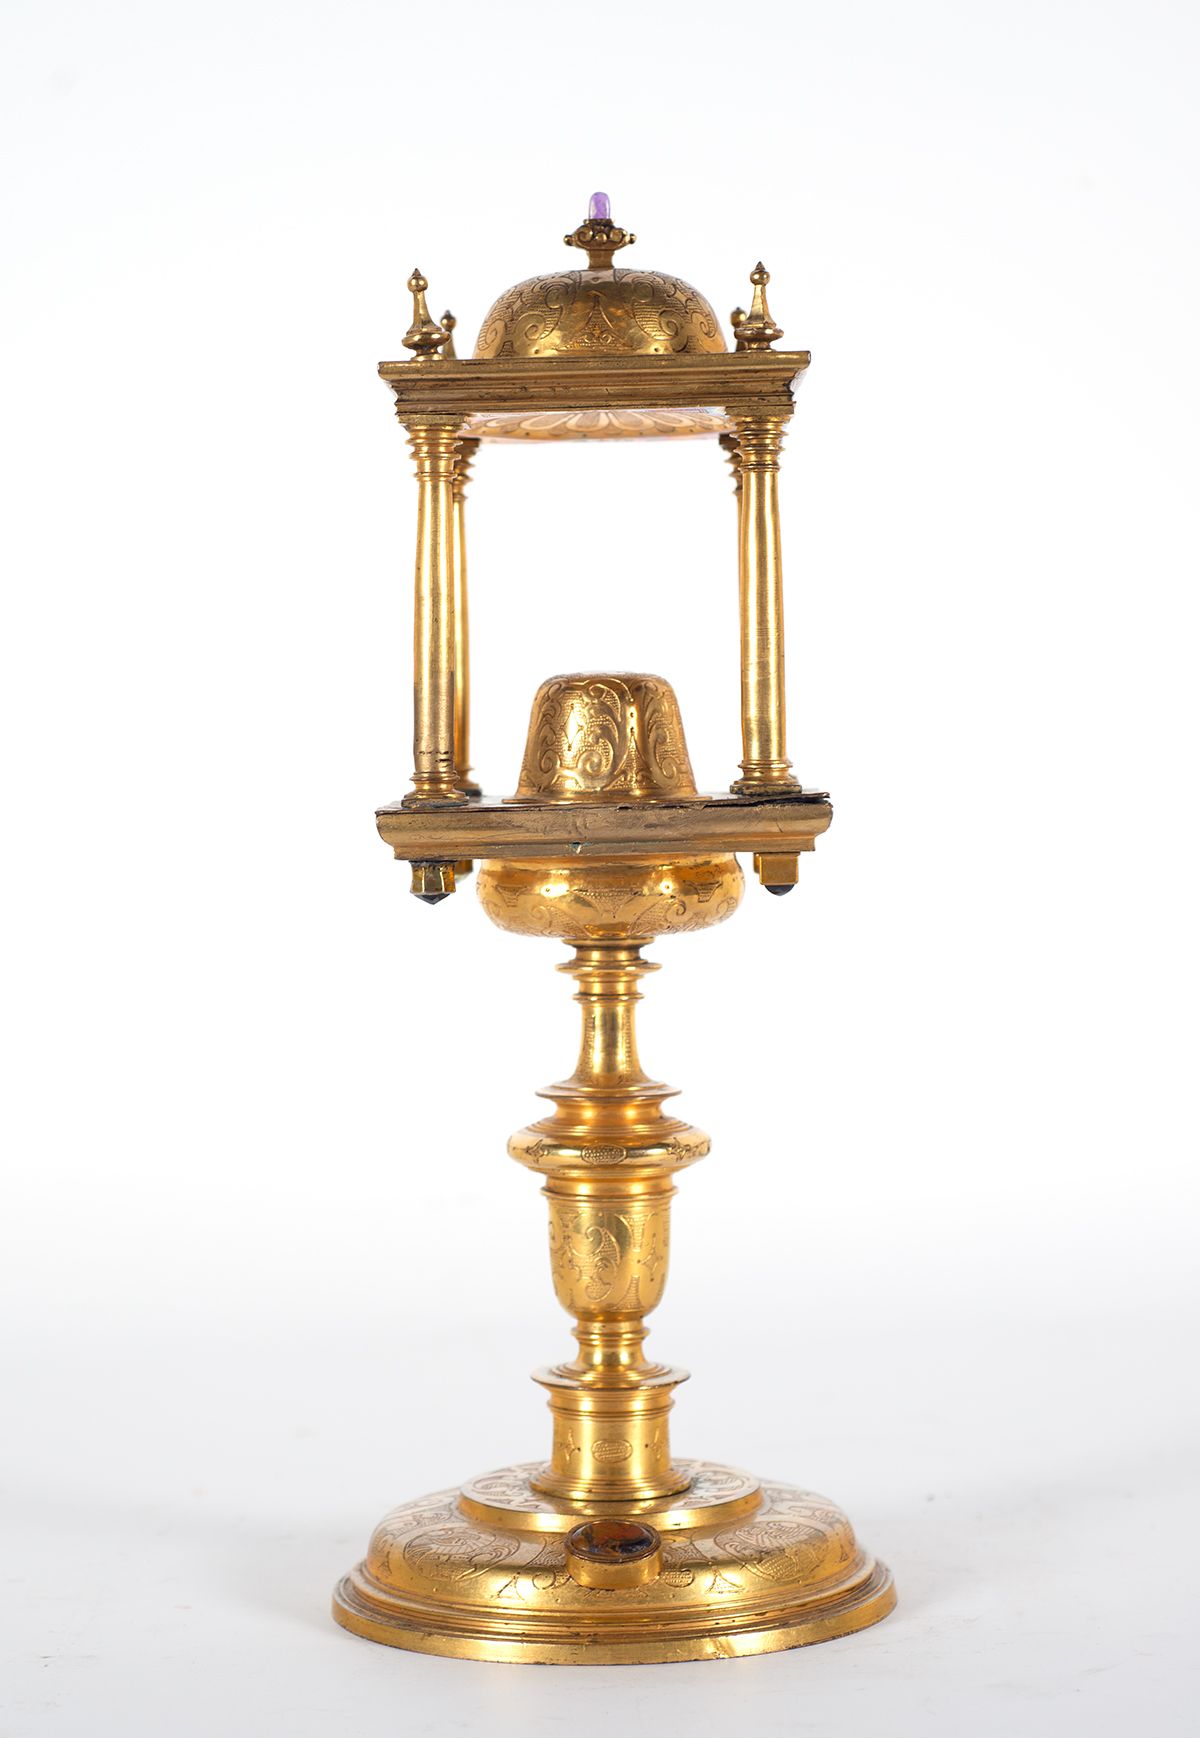 Important monstrance in gilded bronze from the 16th century Medidas: 37 x 11 cm